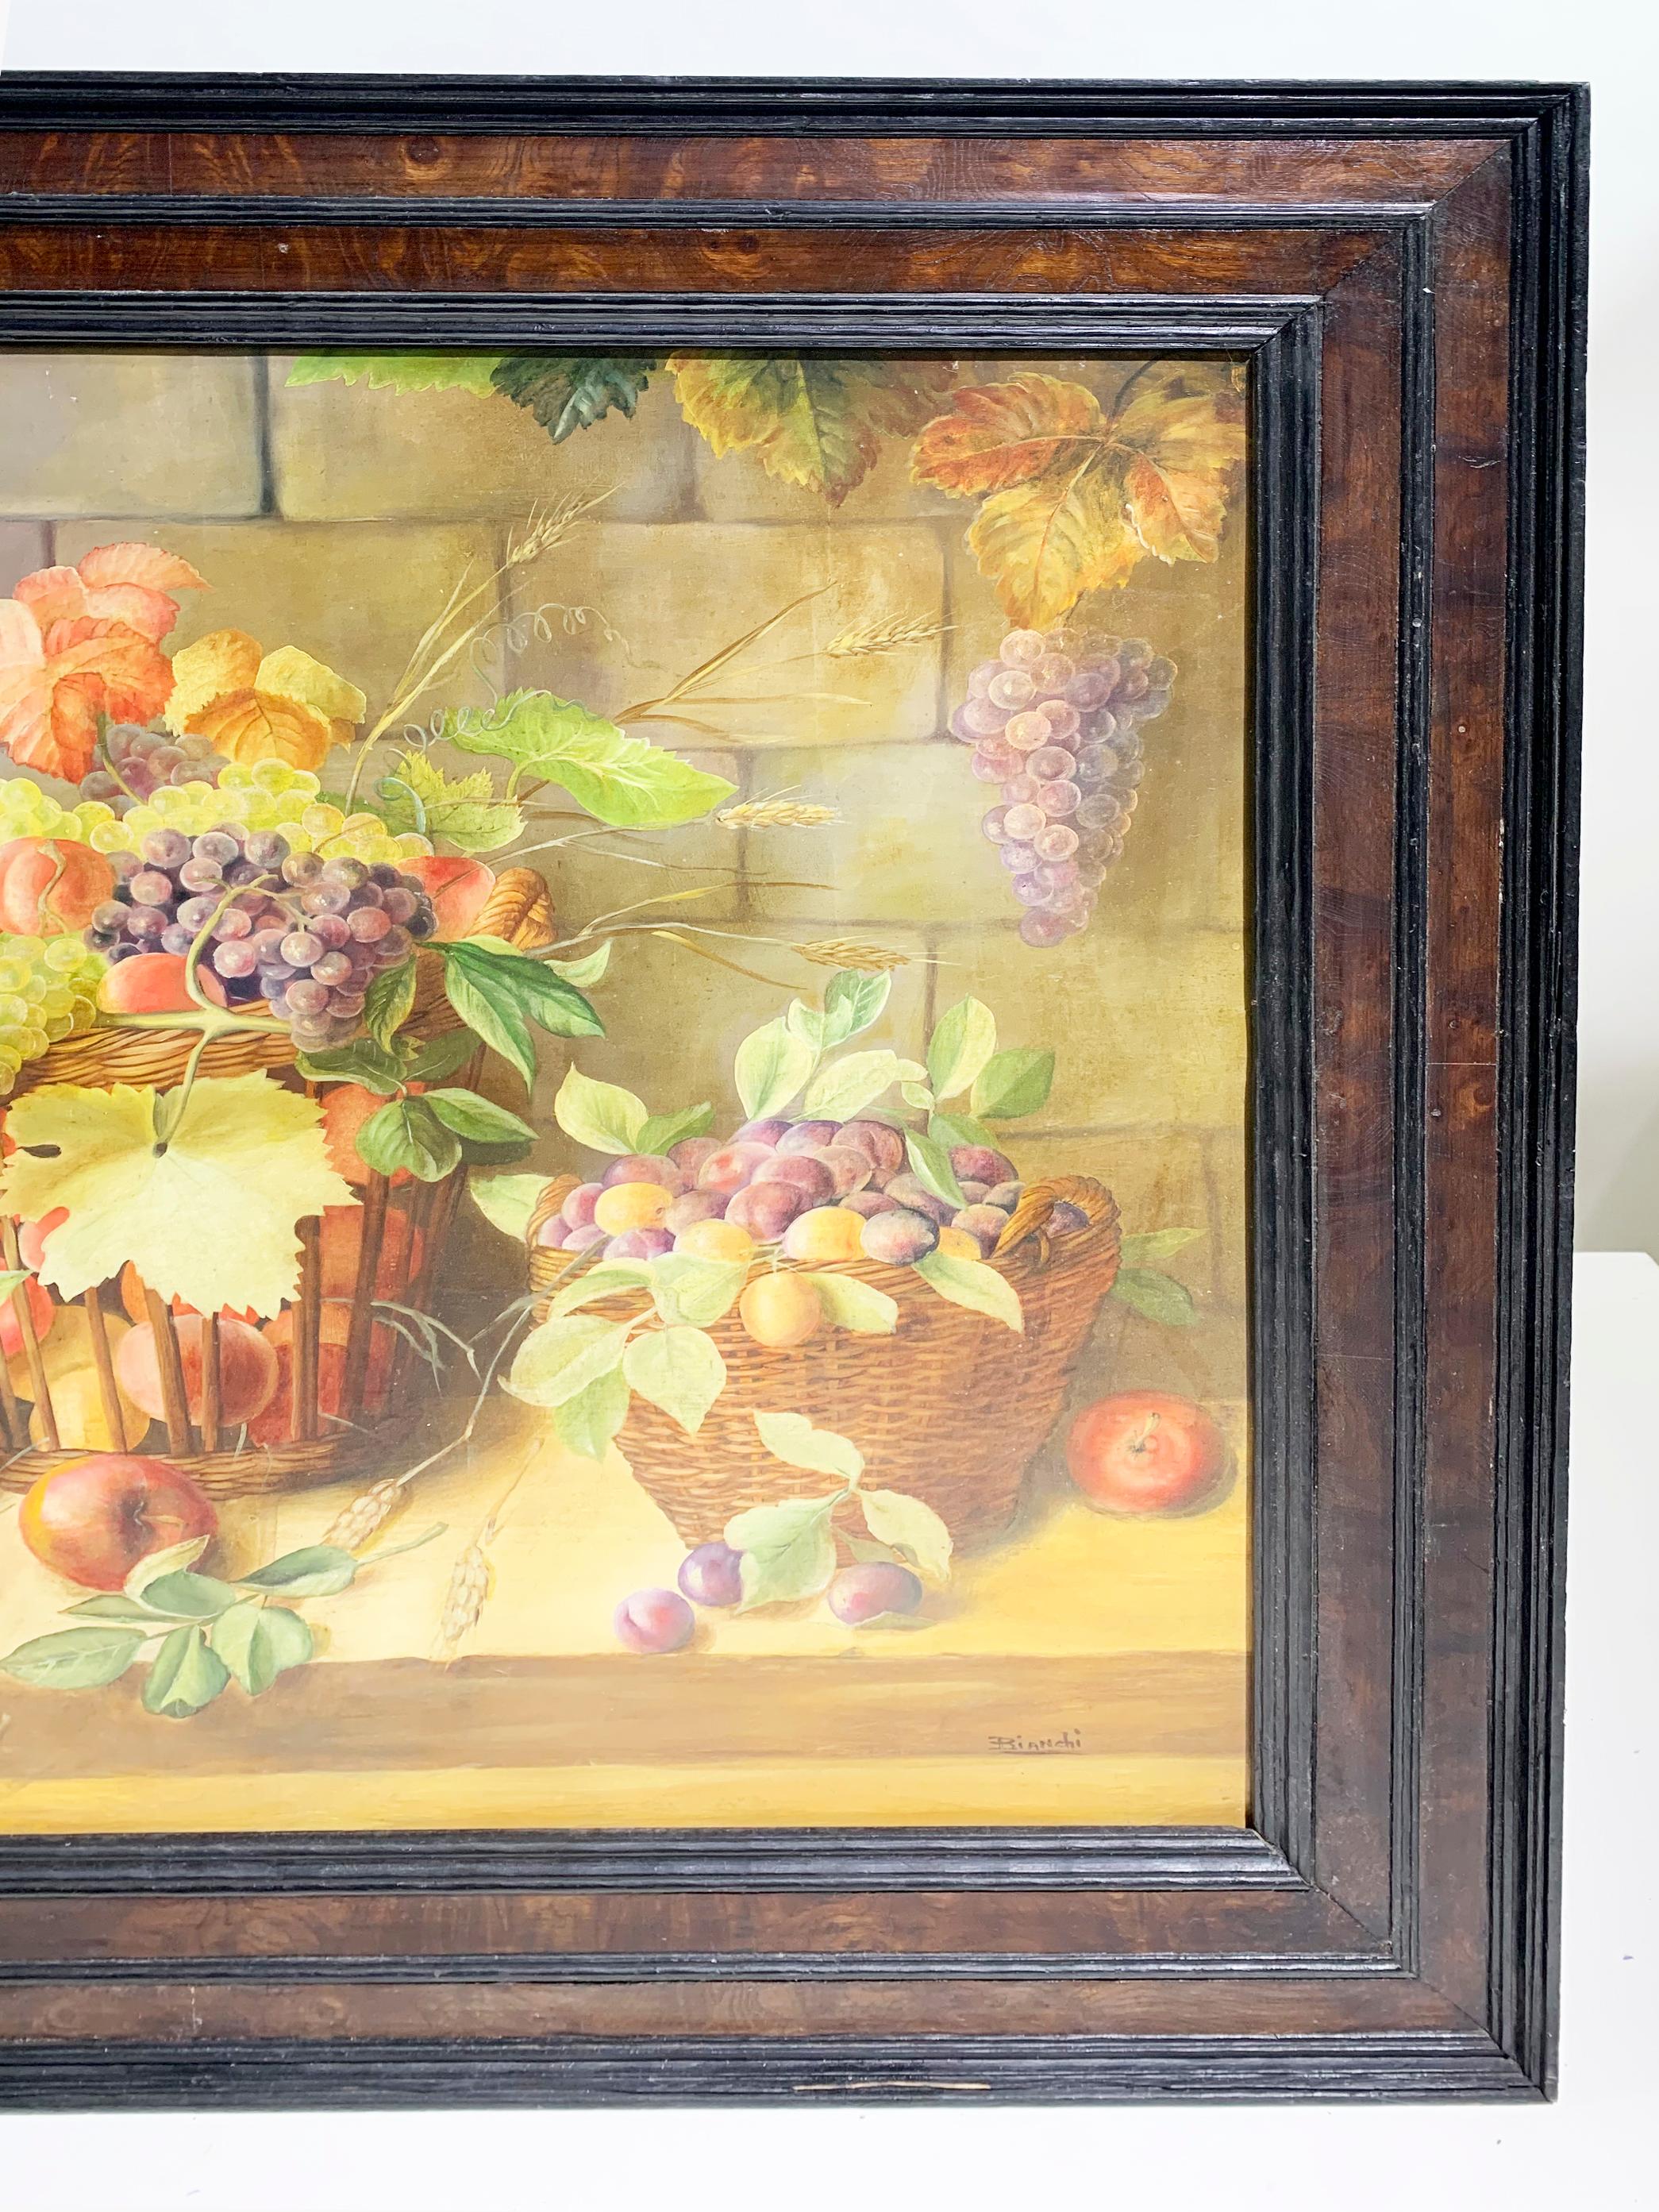 Italian 19th Century Still Life Wooden Framed Painting / Oil on Canvas, Signed Bianchi For Sale